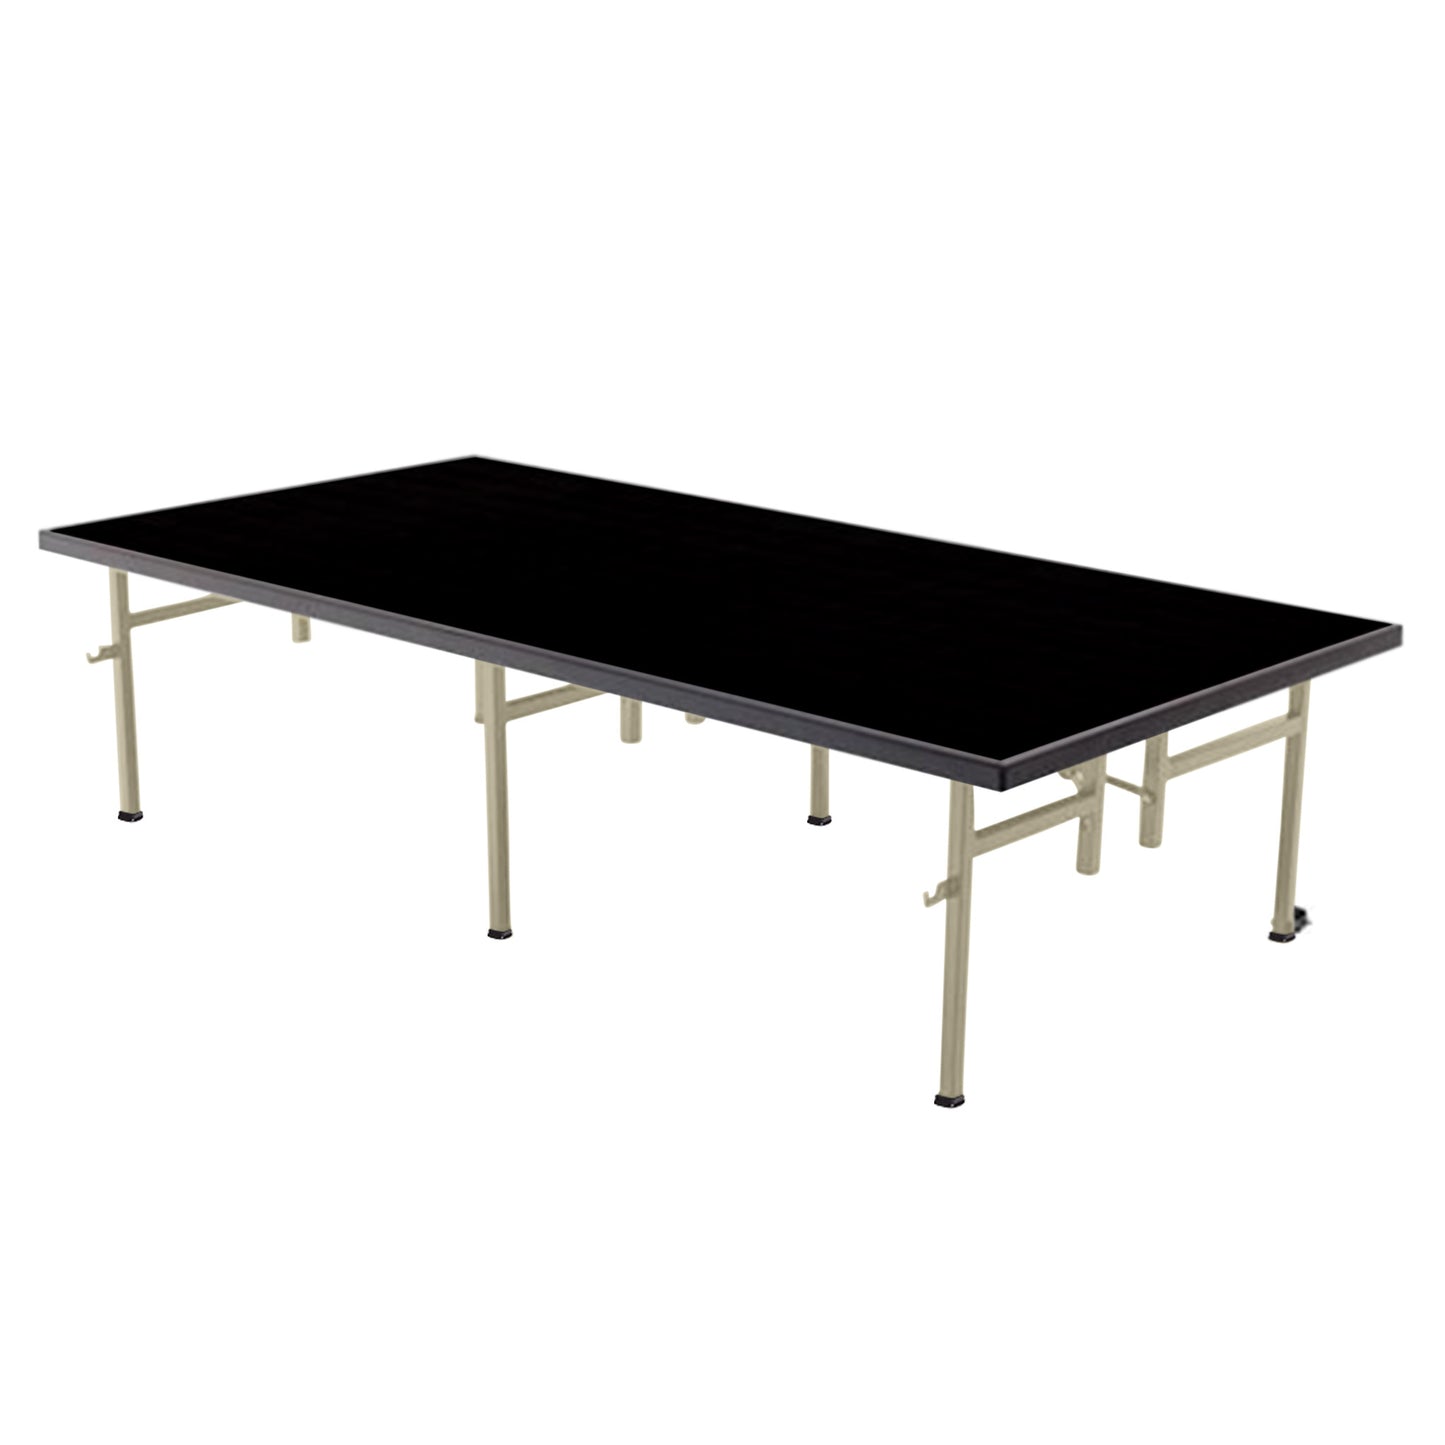 AmTab Fixed Height Stage - Polypropylene Top - 48"W x 96"L x 8"H  (AmTab AMT-ST4808P)